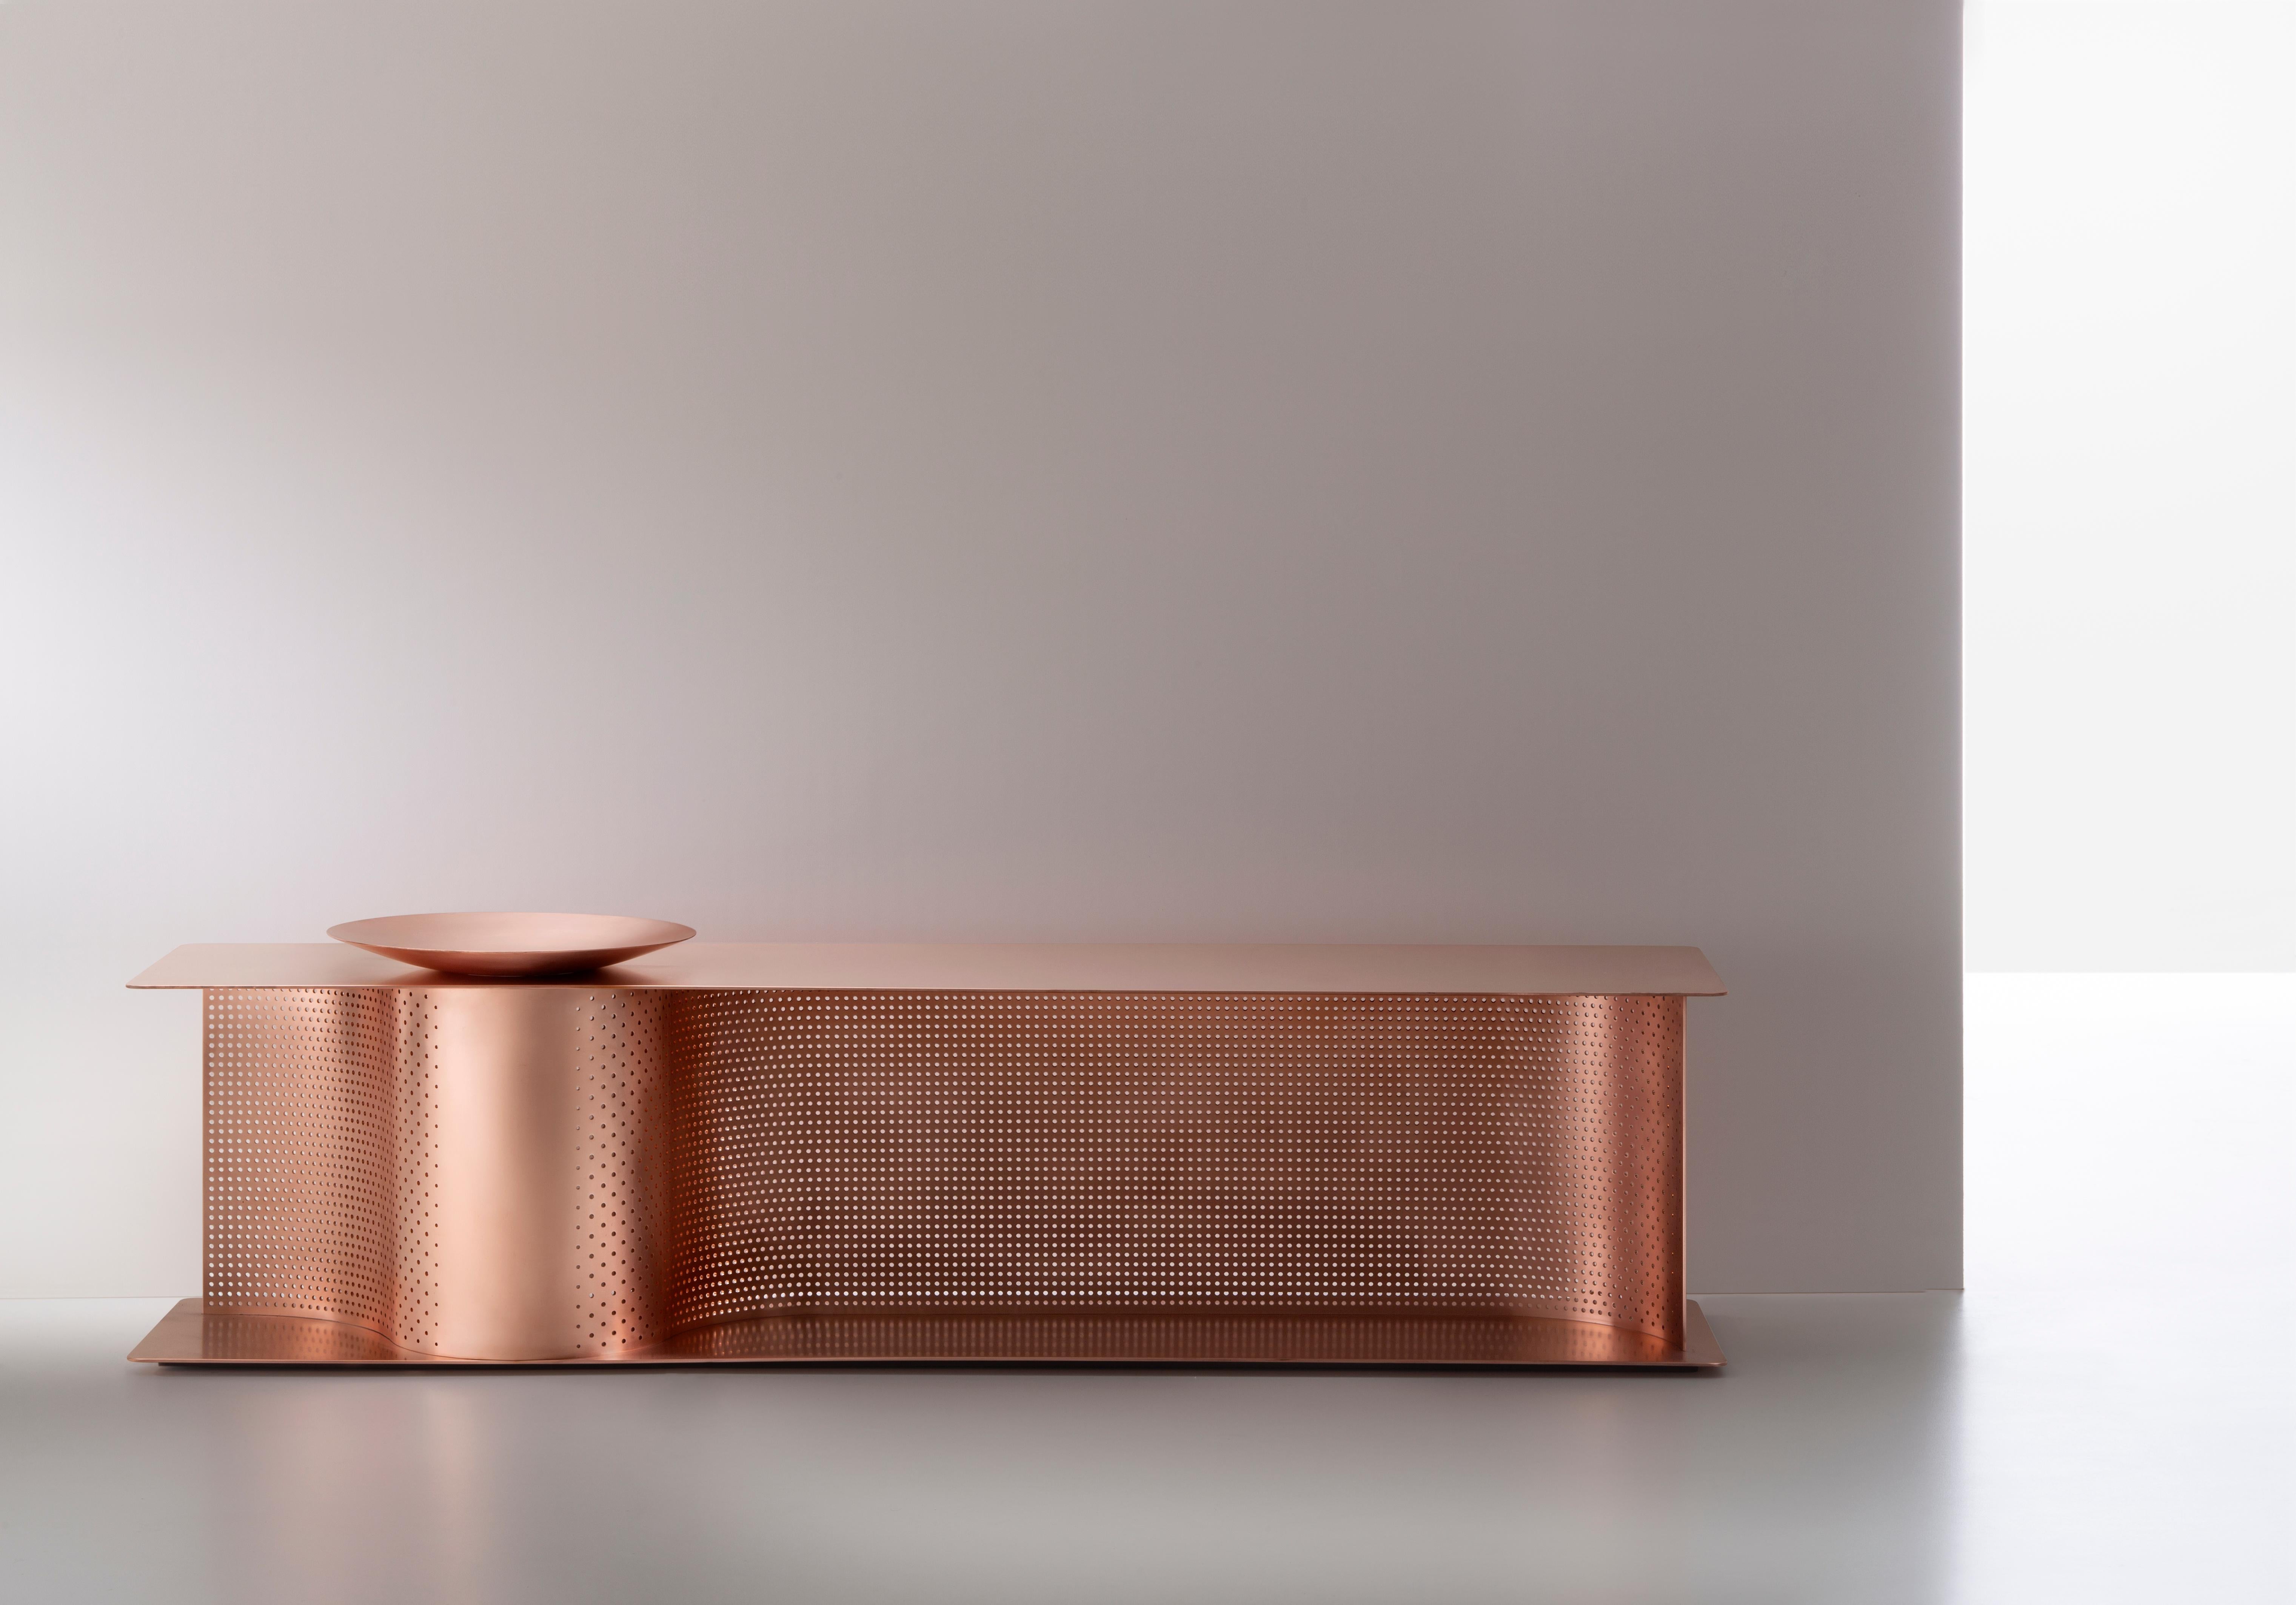 With its essential shapes and gentle, sinuous sense of movement, Wave suggests a renewed, more conscious focus on the ritual of arriving home. The project reinterprets a quintessential piece Asian furniture: the shoe bench. Its humble function as a